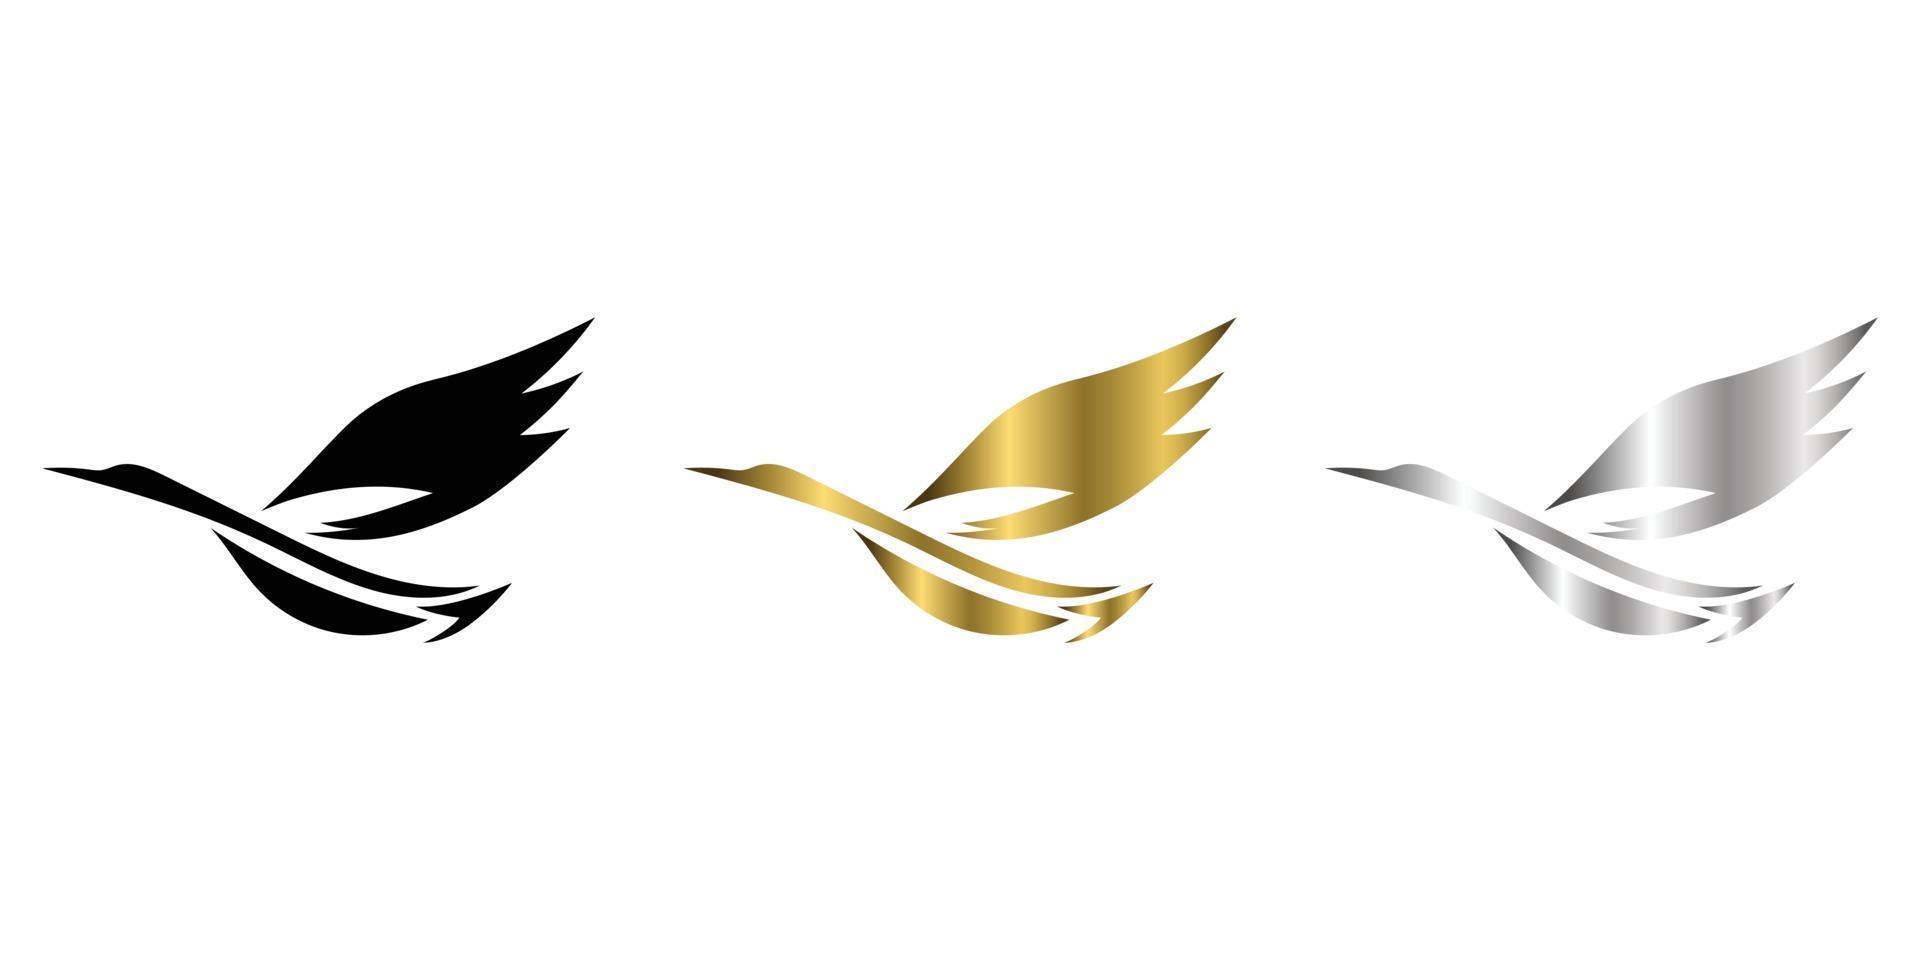 The abstract vector three color black gold silver image of a flying heron is suitable for making logos or decorations